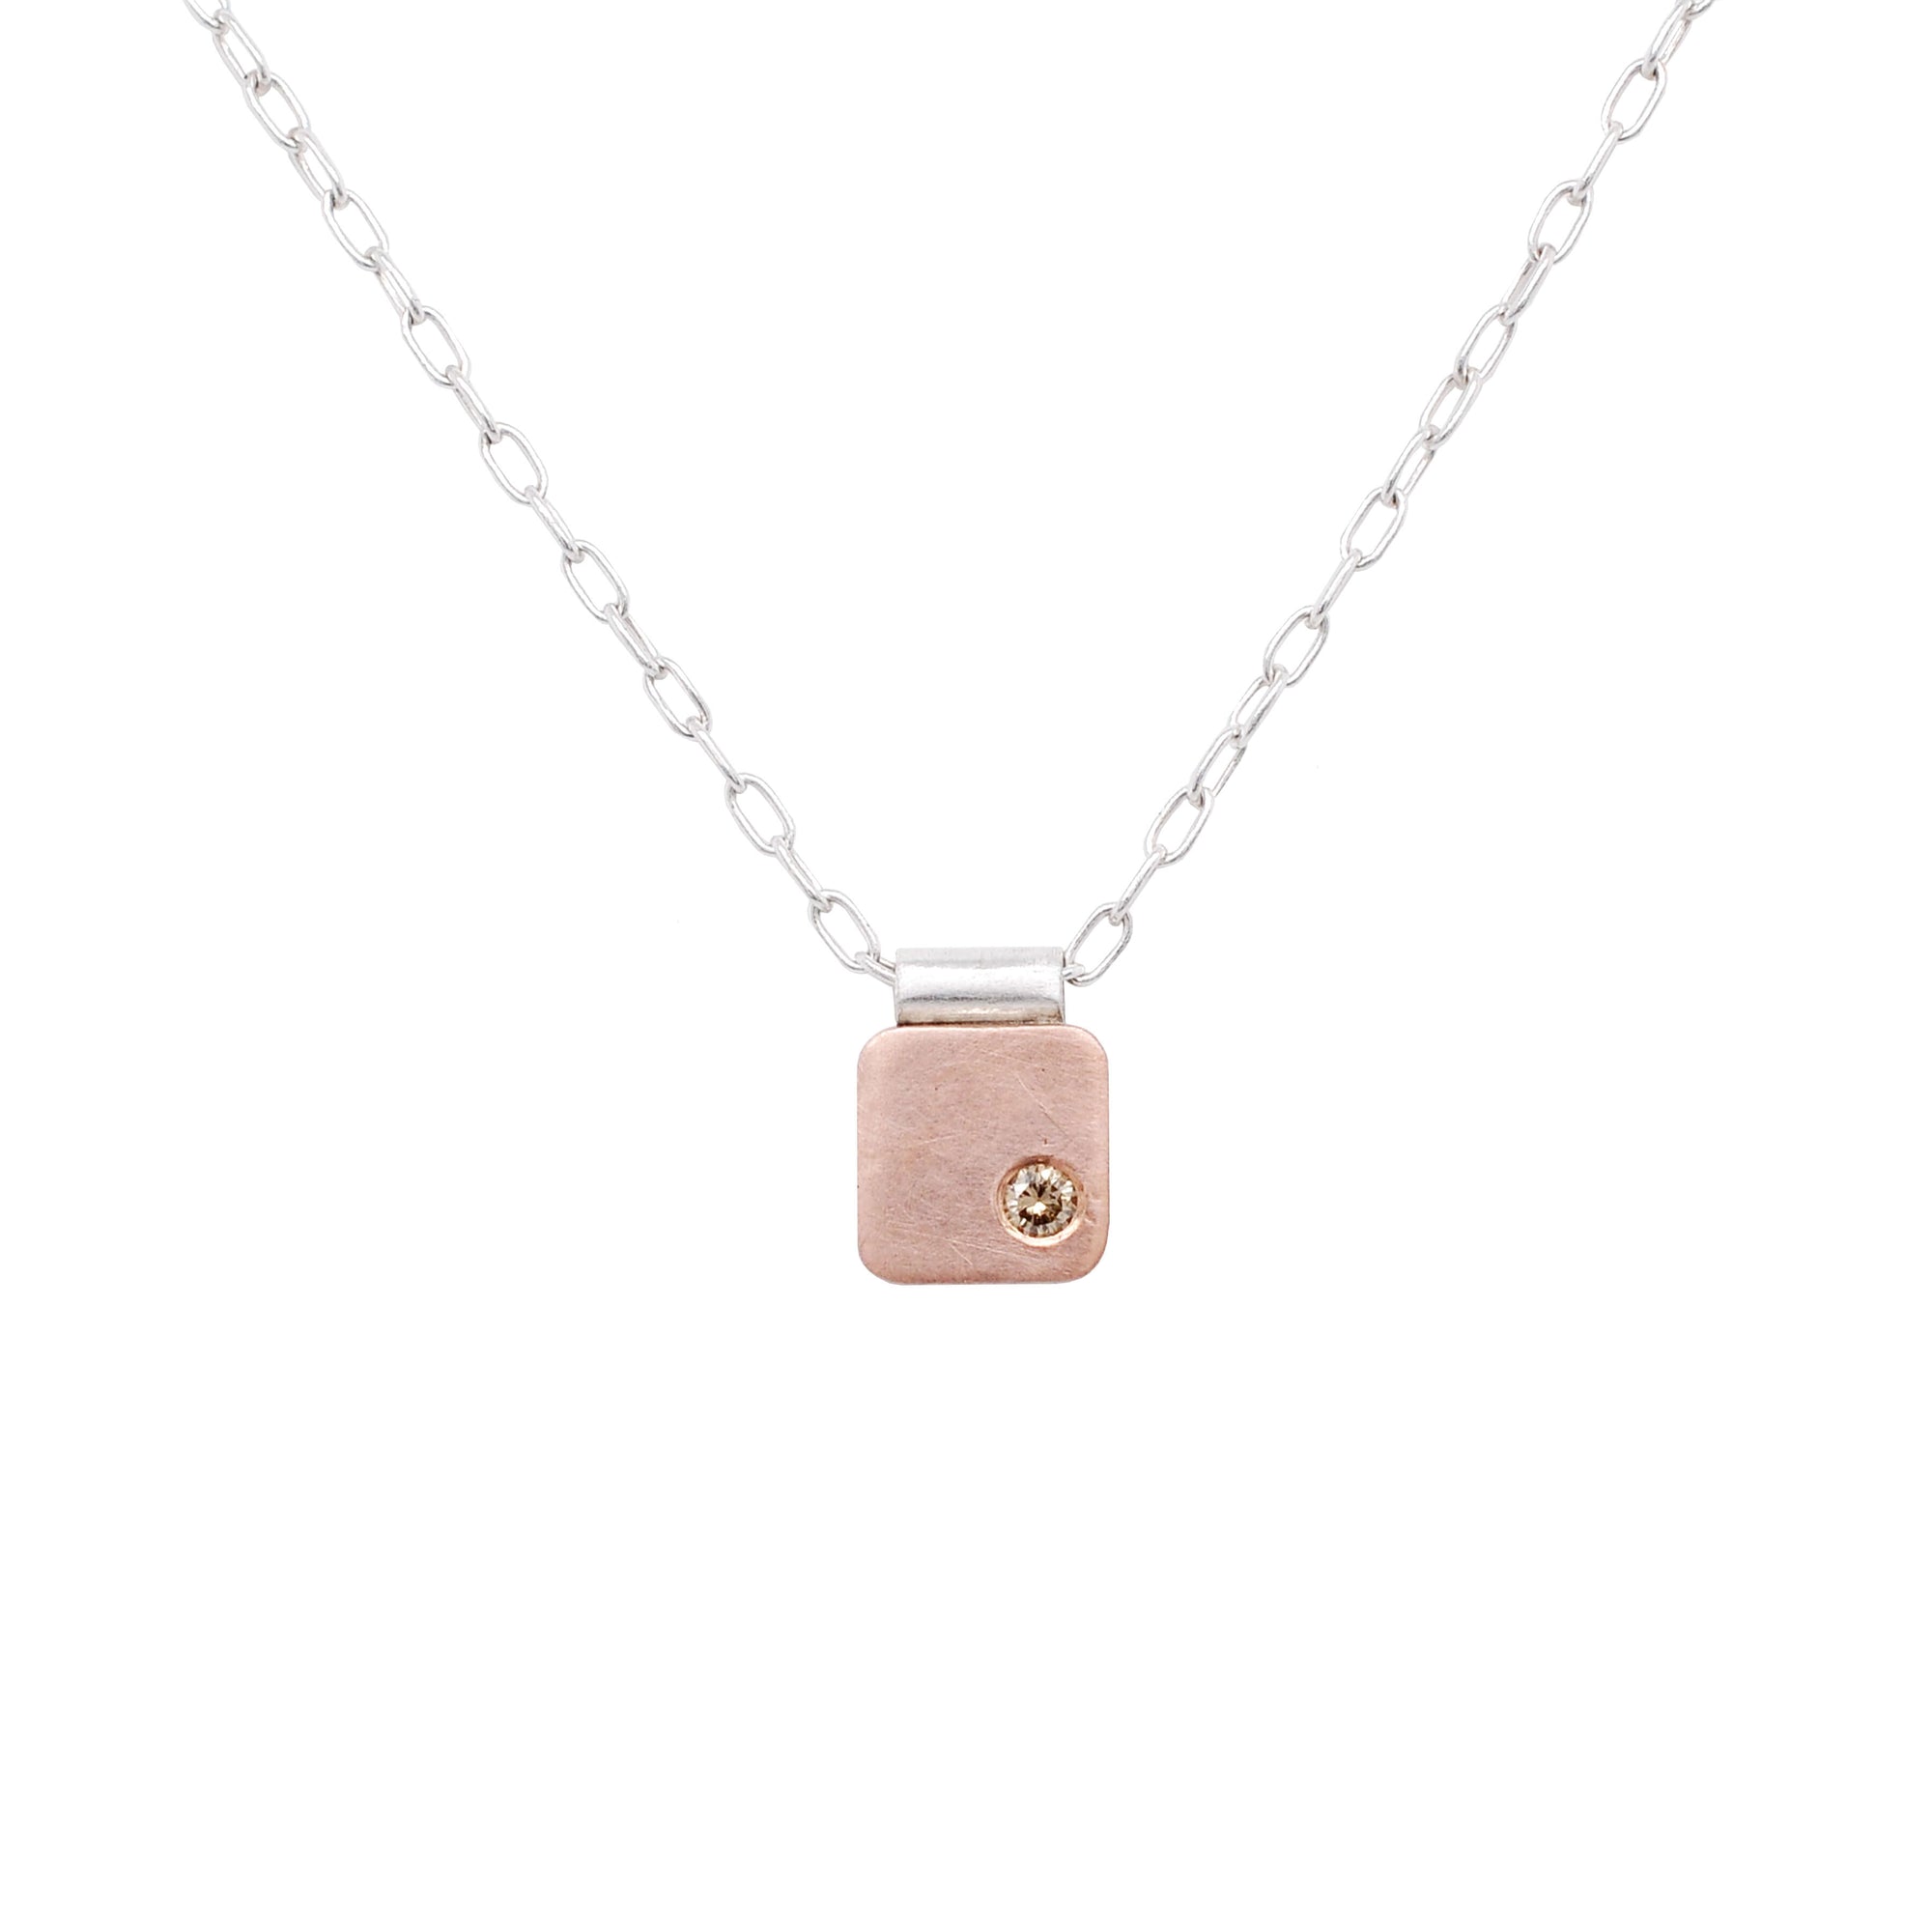 Rose gold cell pendant with champagne diamond accent. Handmade by EC Design Jewelry in Minneapolis, MN.